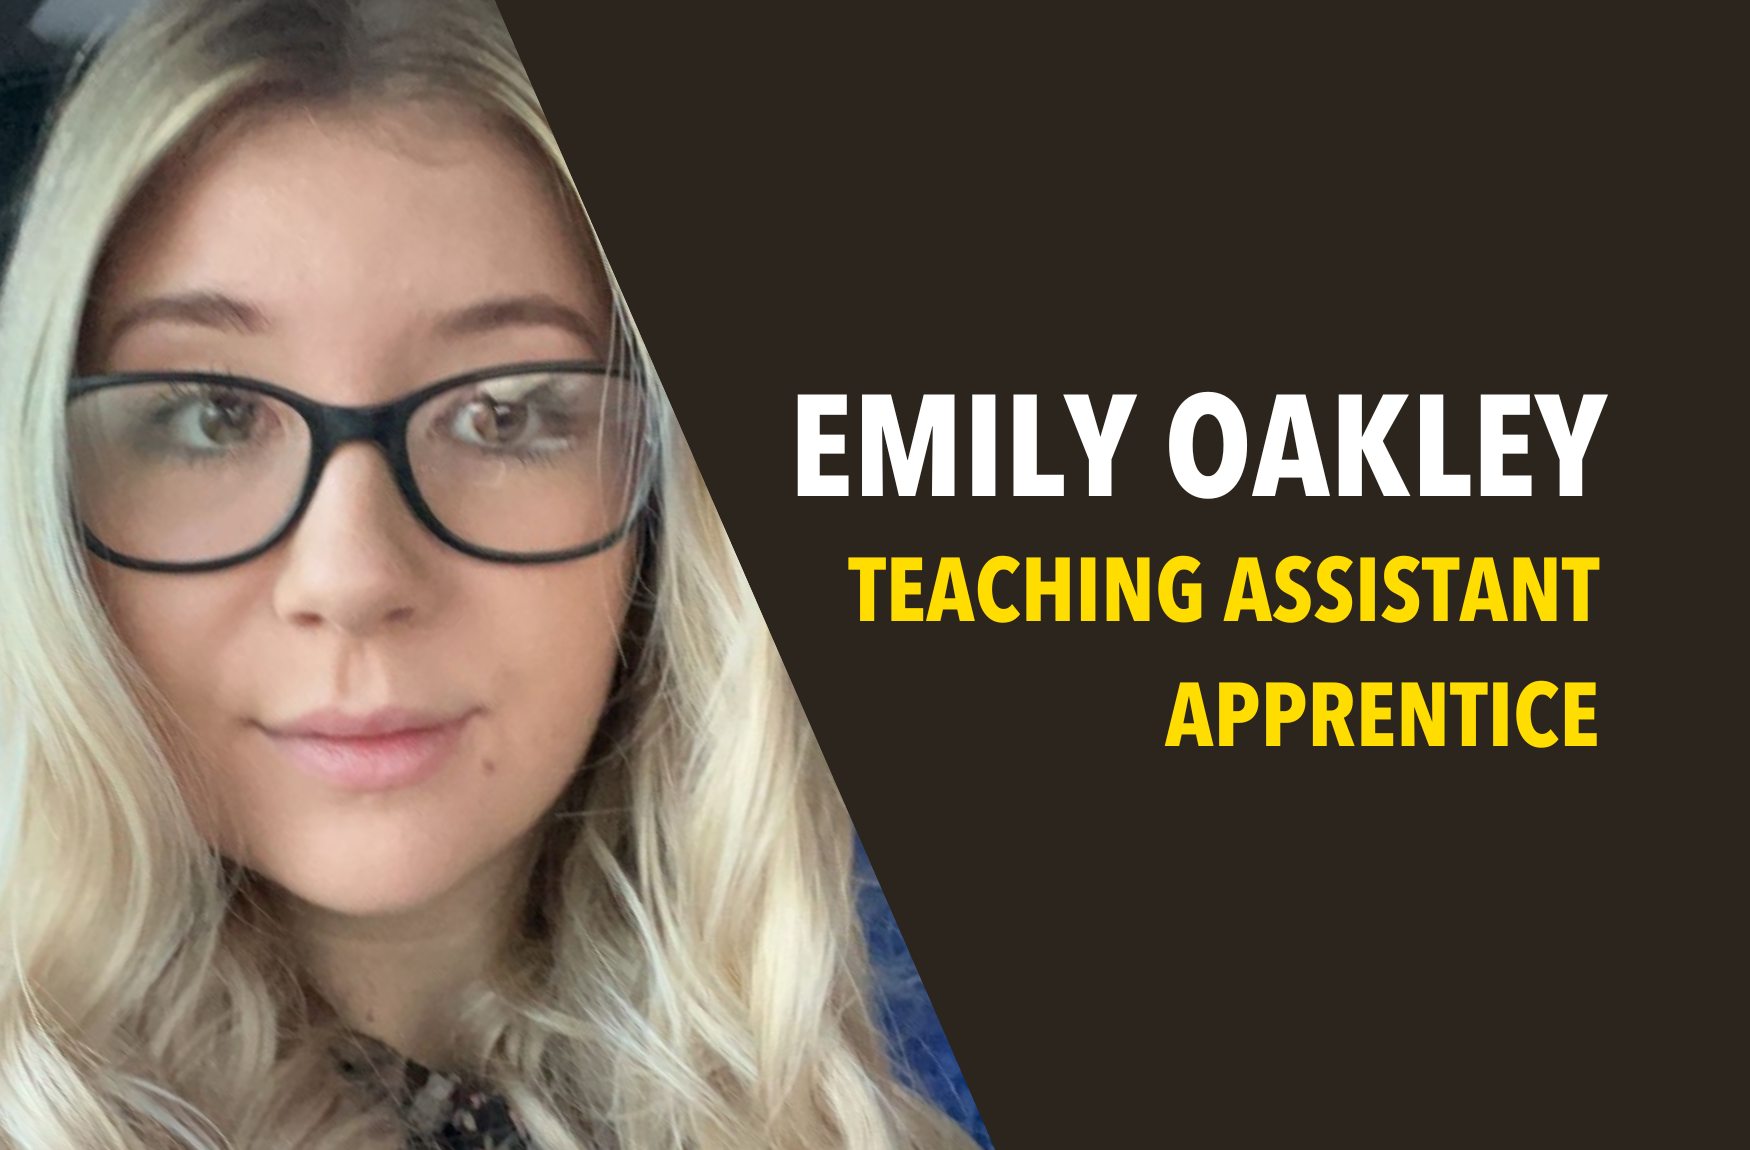 Meet Emily, Teaching Assistant Apprentice at Forest View Primary School